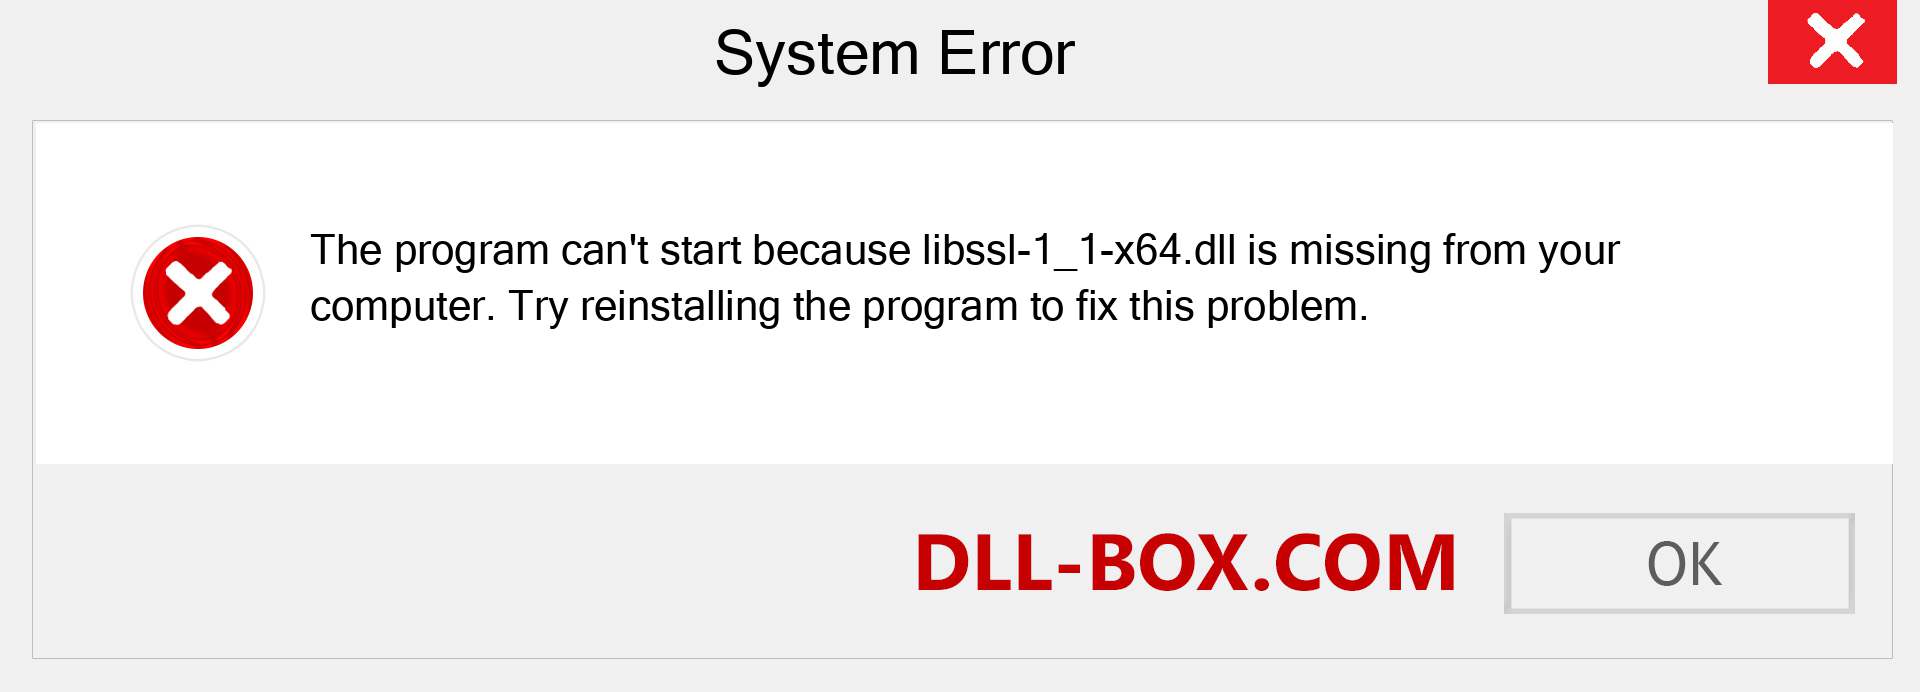  libssl-1_1-x64.dll file is missing?. Download for Windows 7, 8, 10 - Fix  libssl-1_1-x64 dll Missing Error on Windows, photos, images